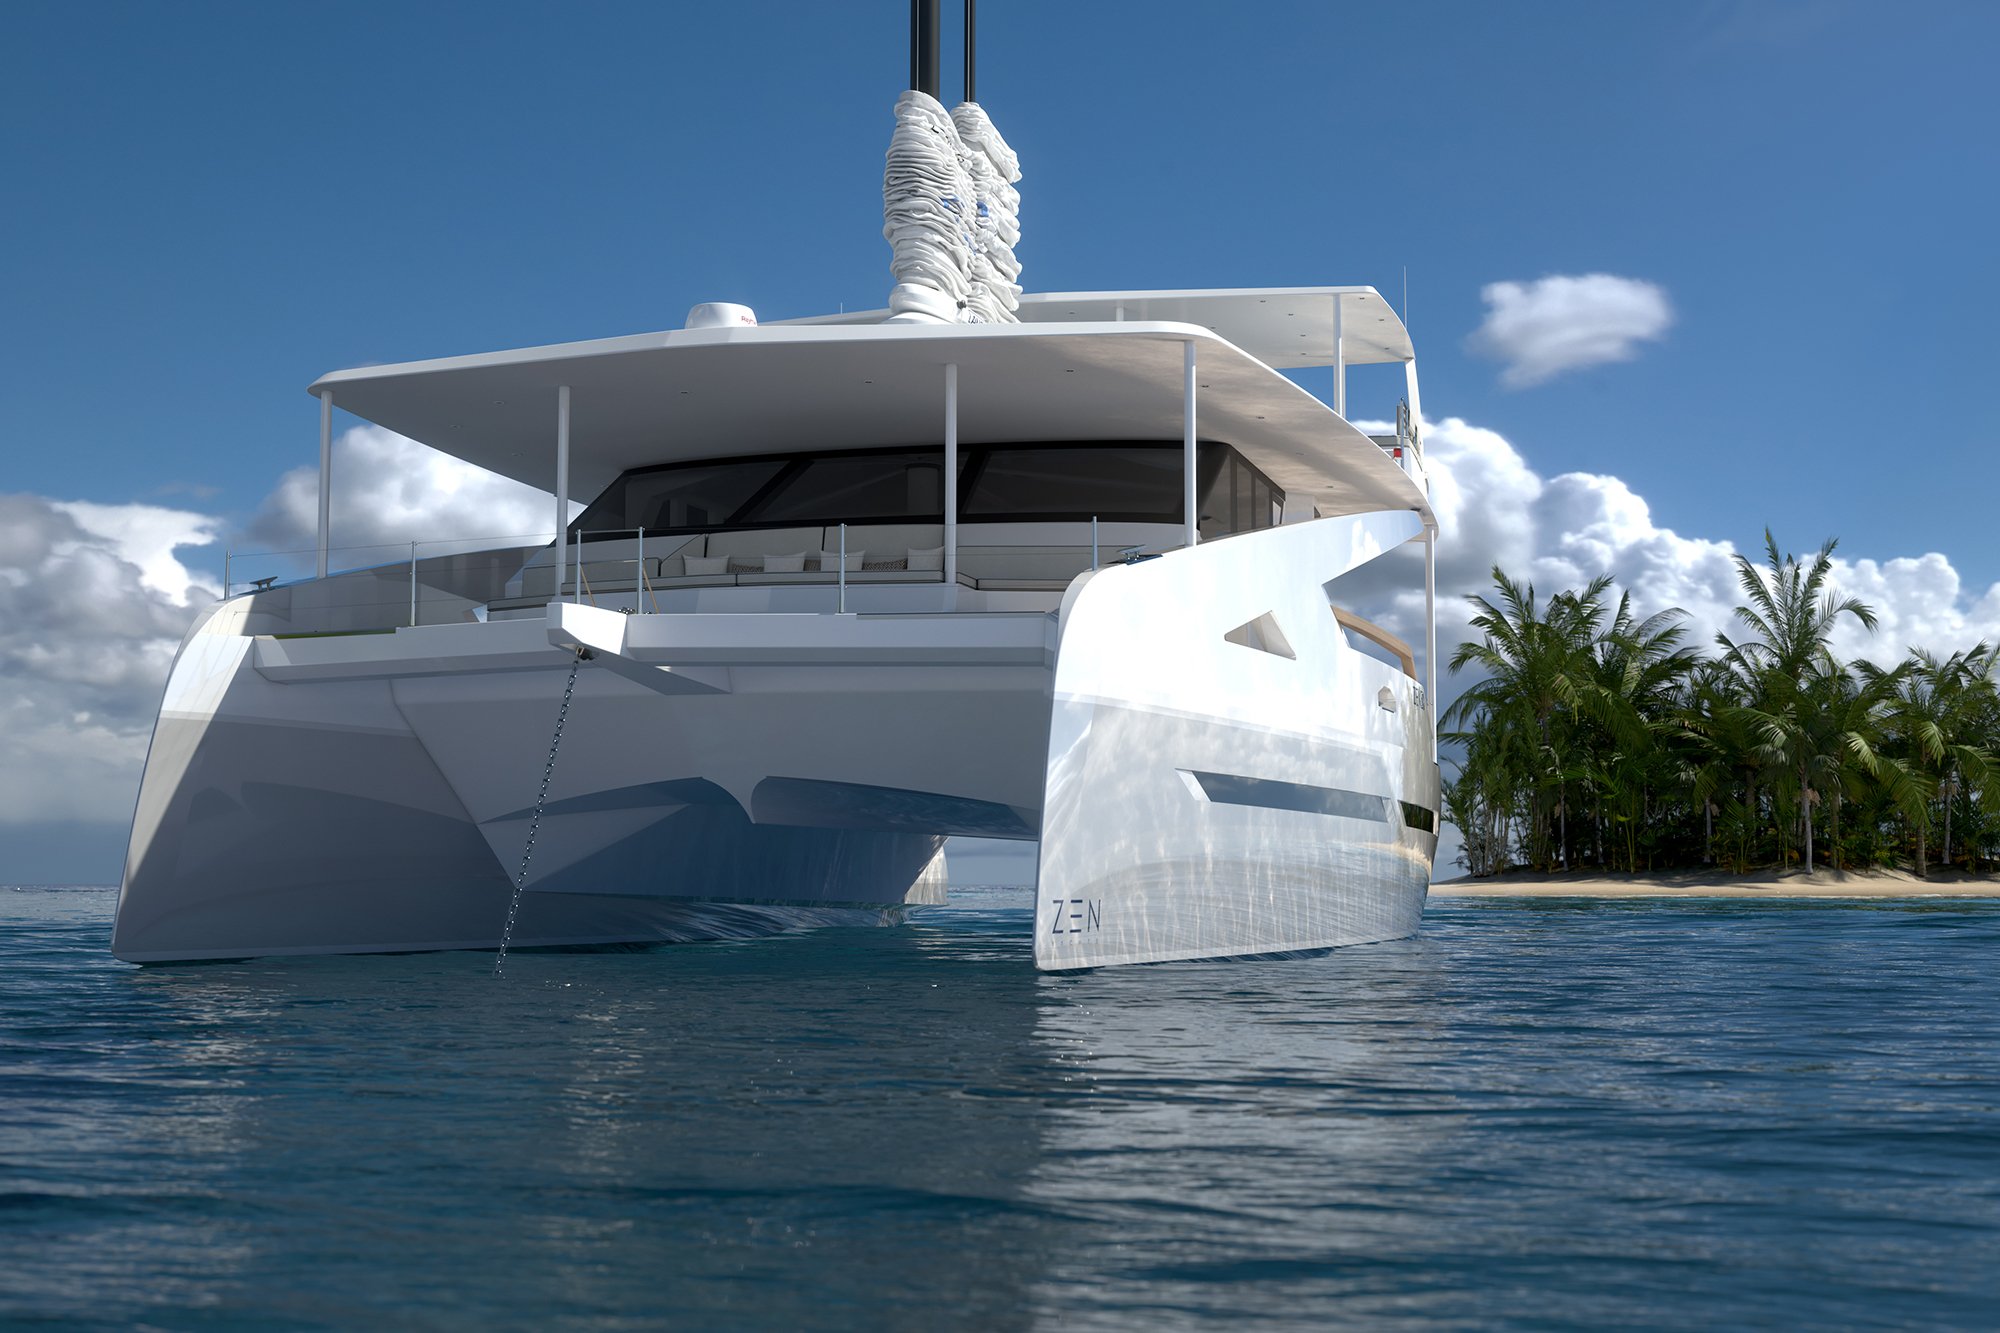 The design of the solar-powered ZEN50 Catamaran featuring an automated wingsail